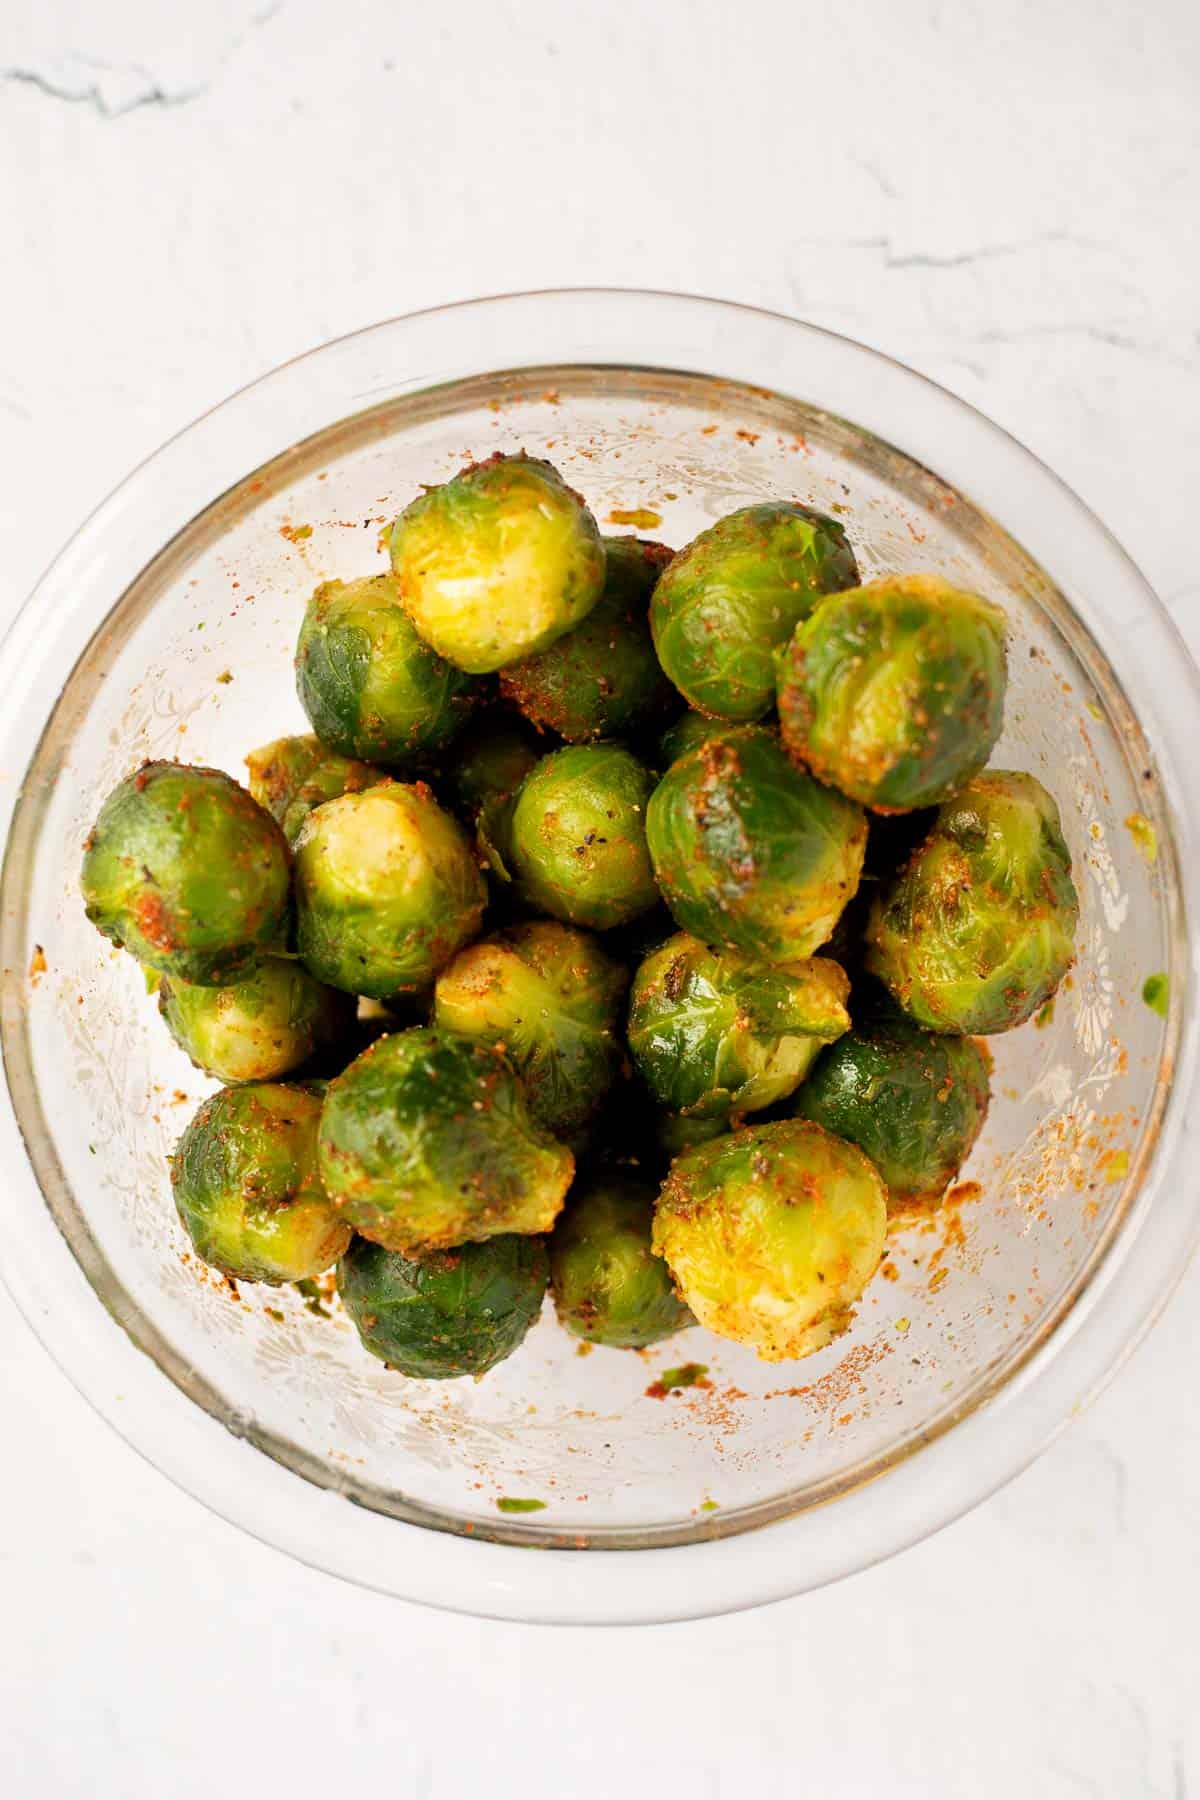 sprouts seasoned with spices in glass bowl.